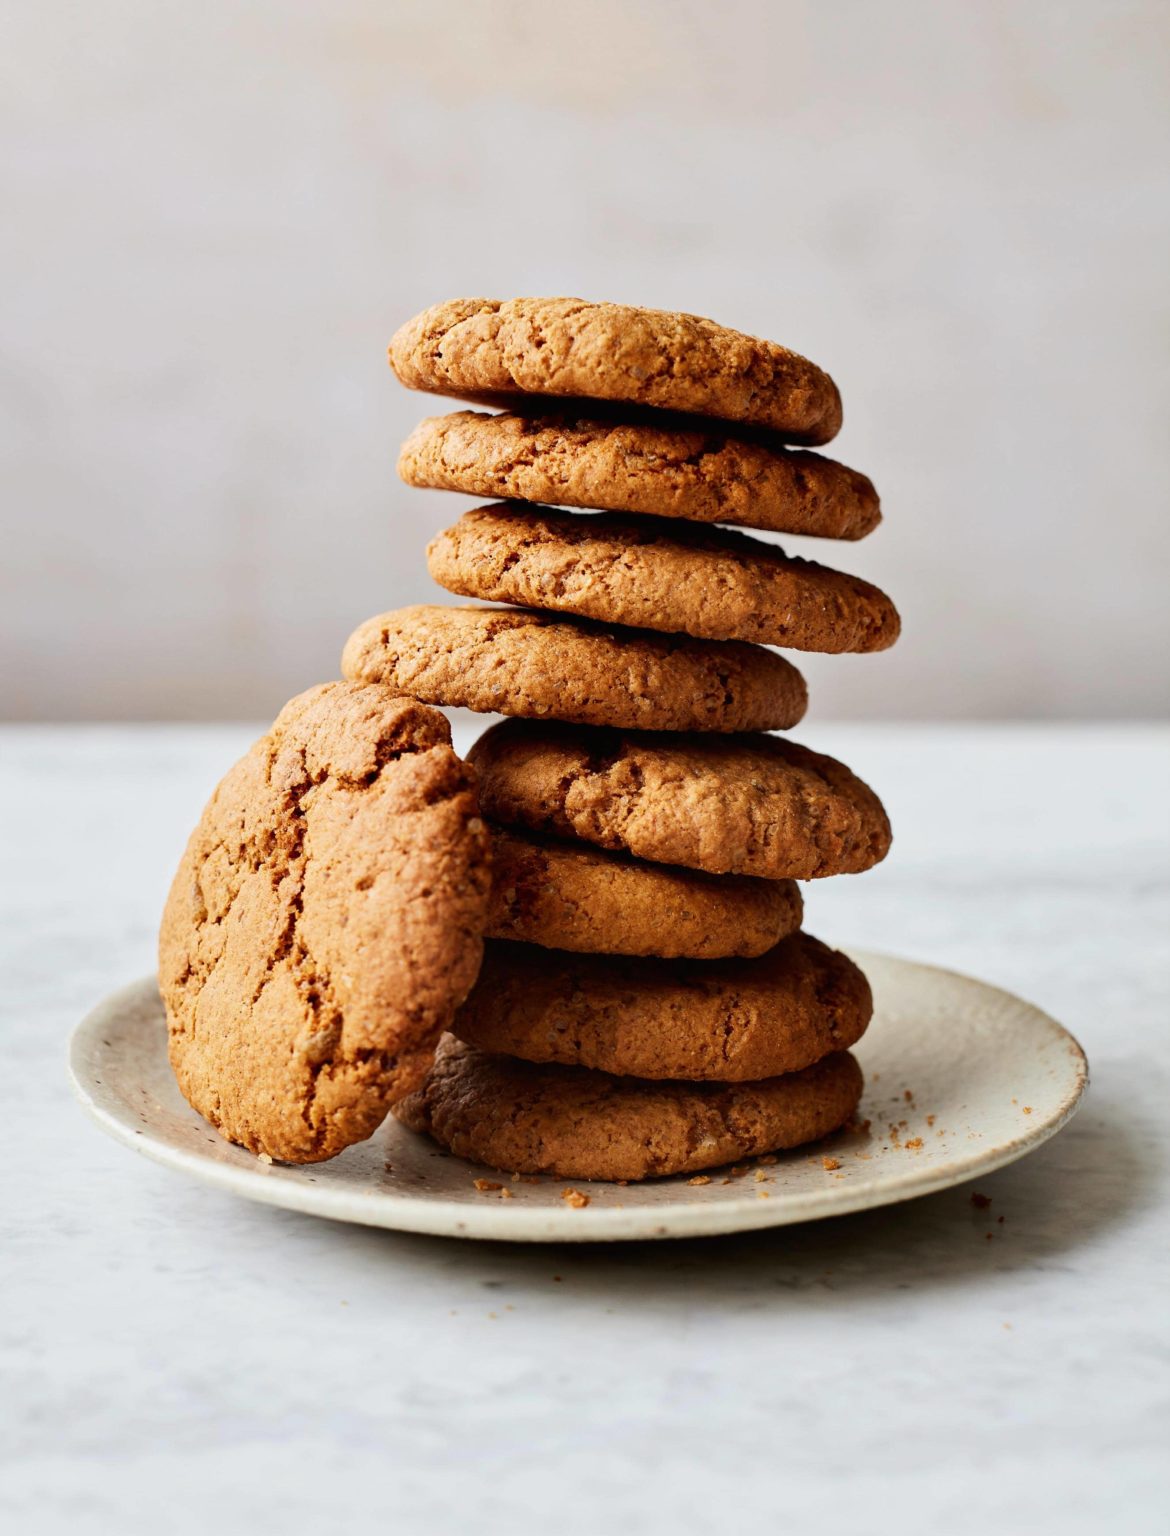 Mary Berry Best Ginger Biscuits Recipe Bbc2 Love To Cook 2021